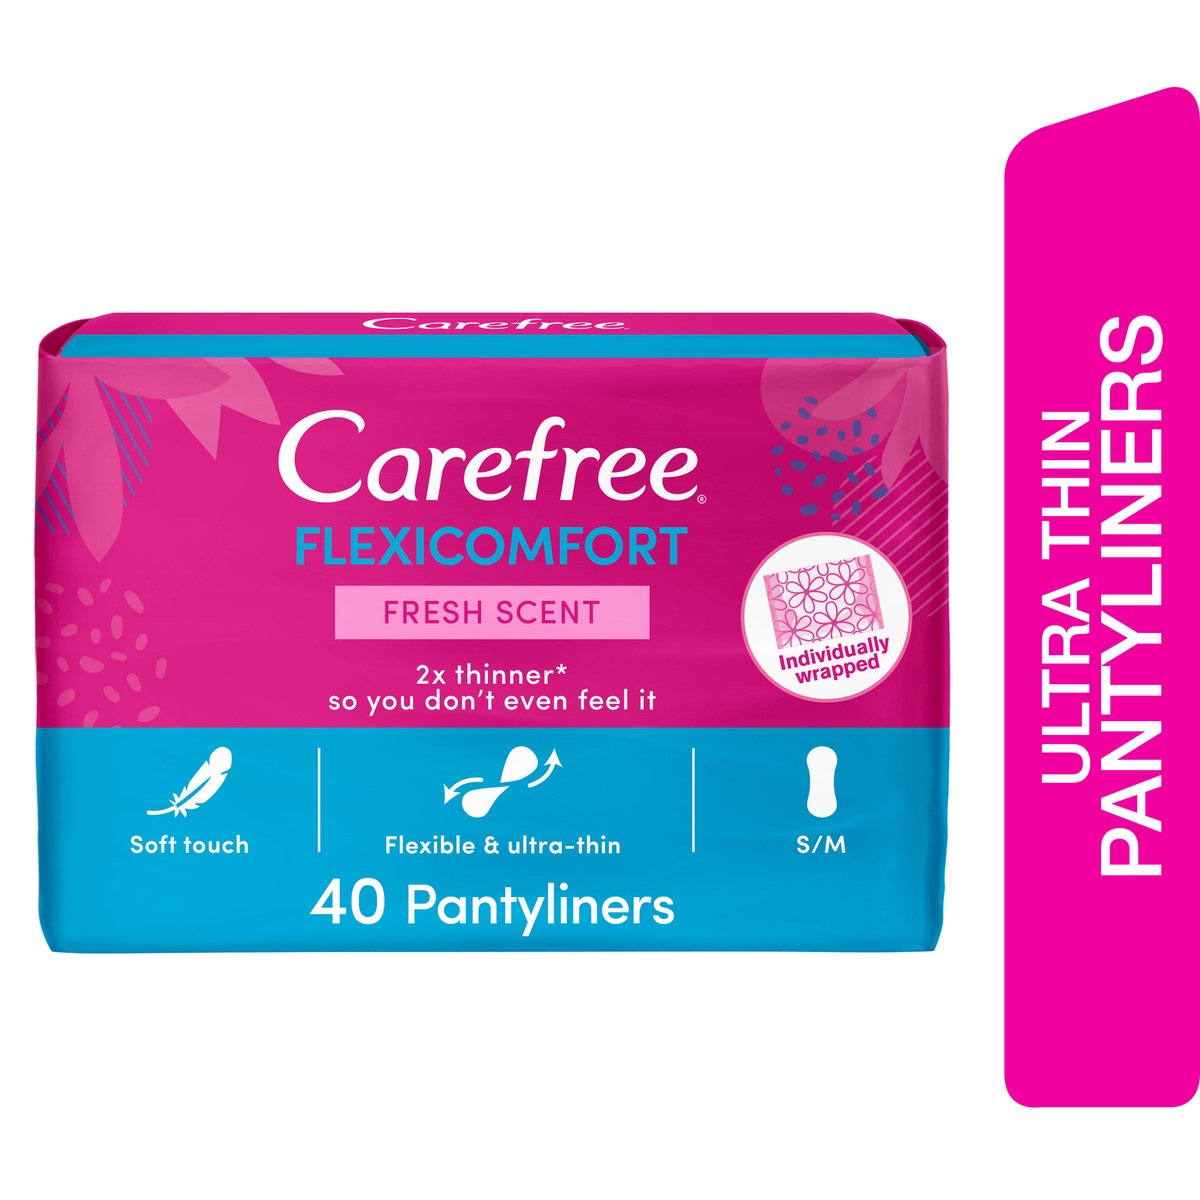 Carefree Panty Liners FlexiComfort Fresh Scent 40pcs Online at Best Price, Sanpro Panty Liners